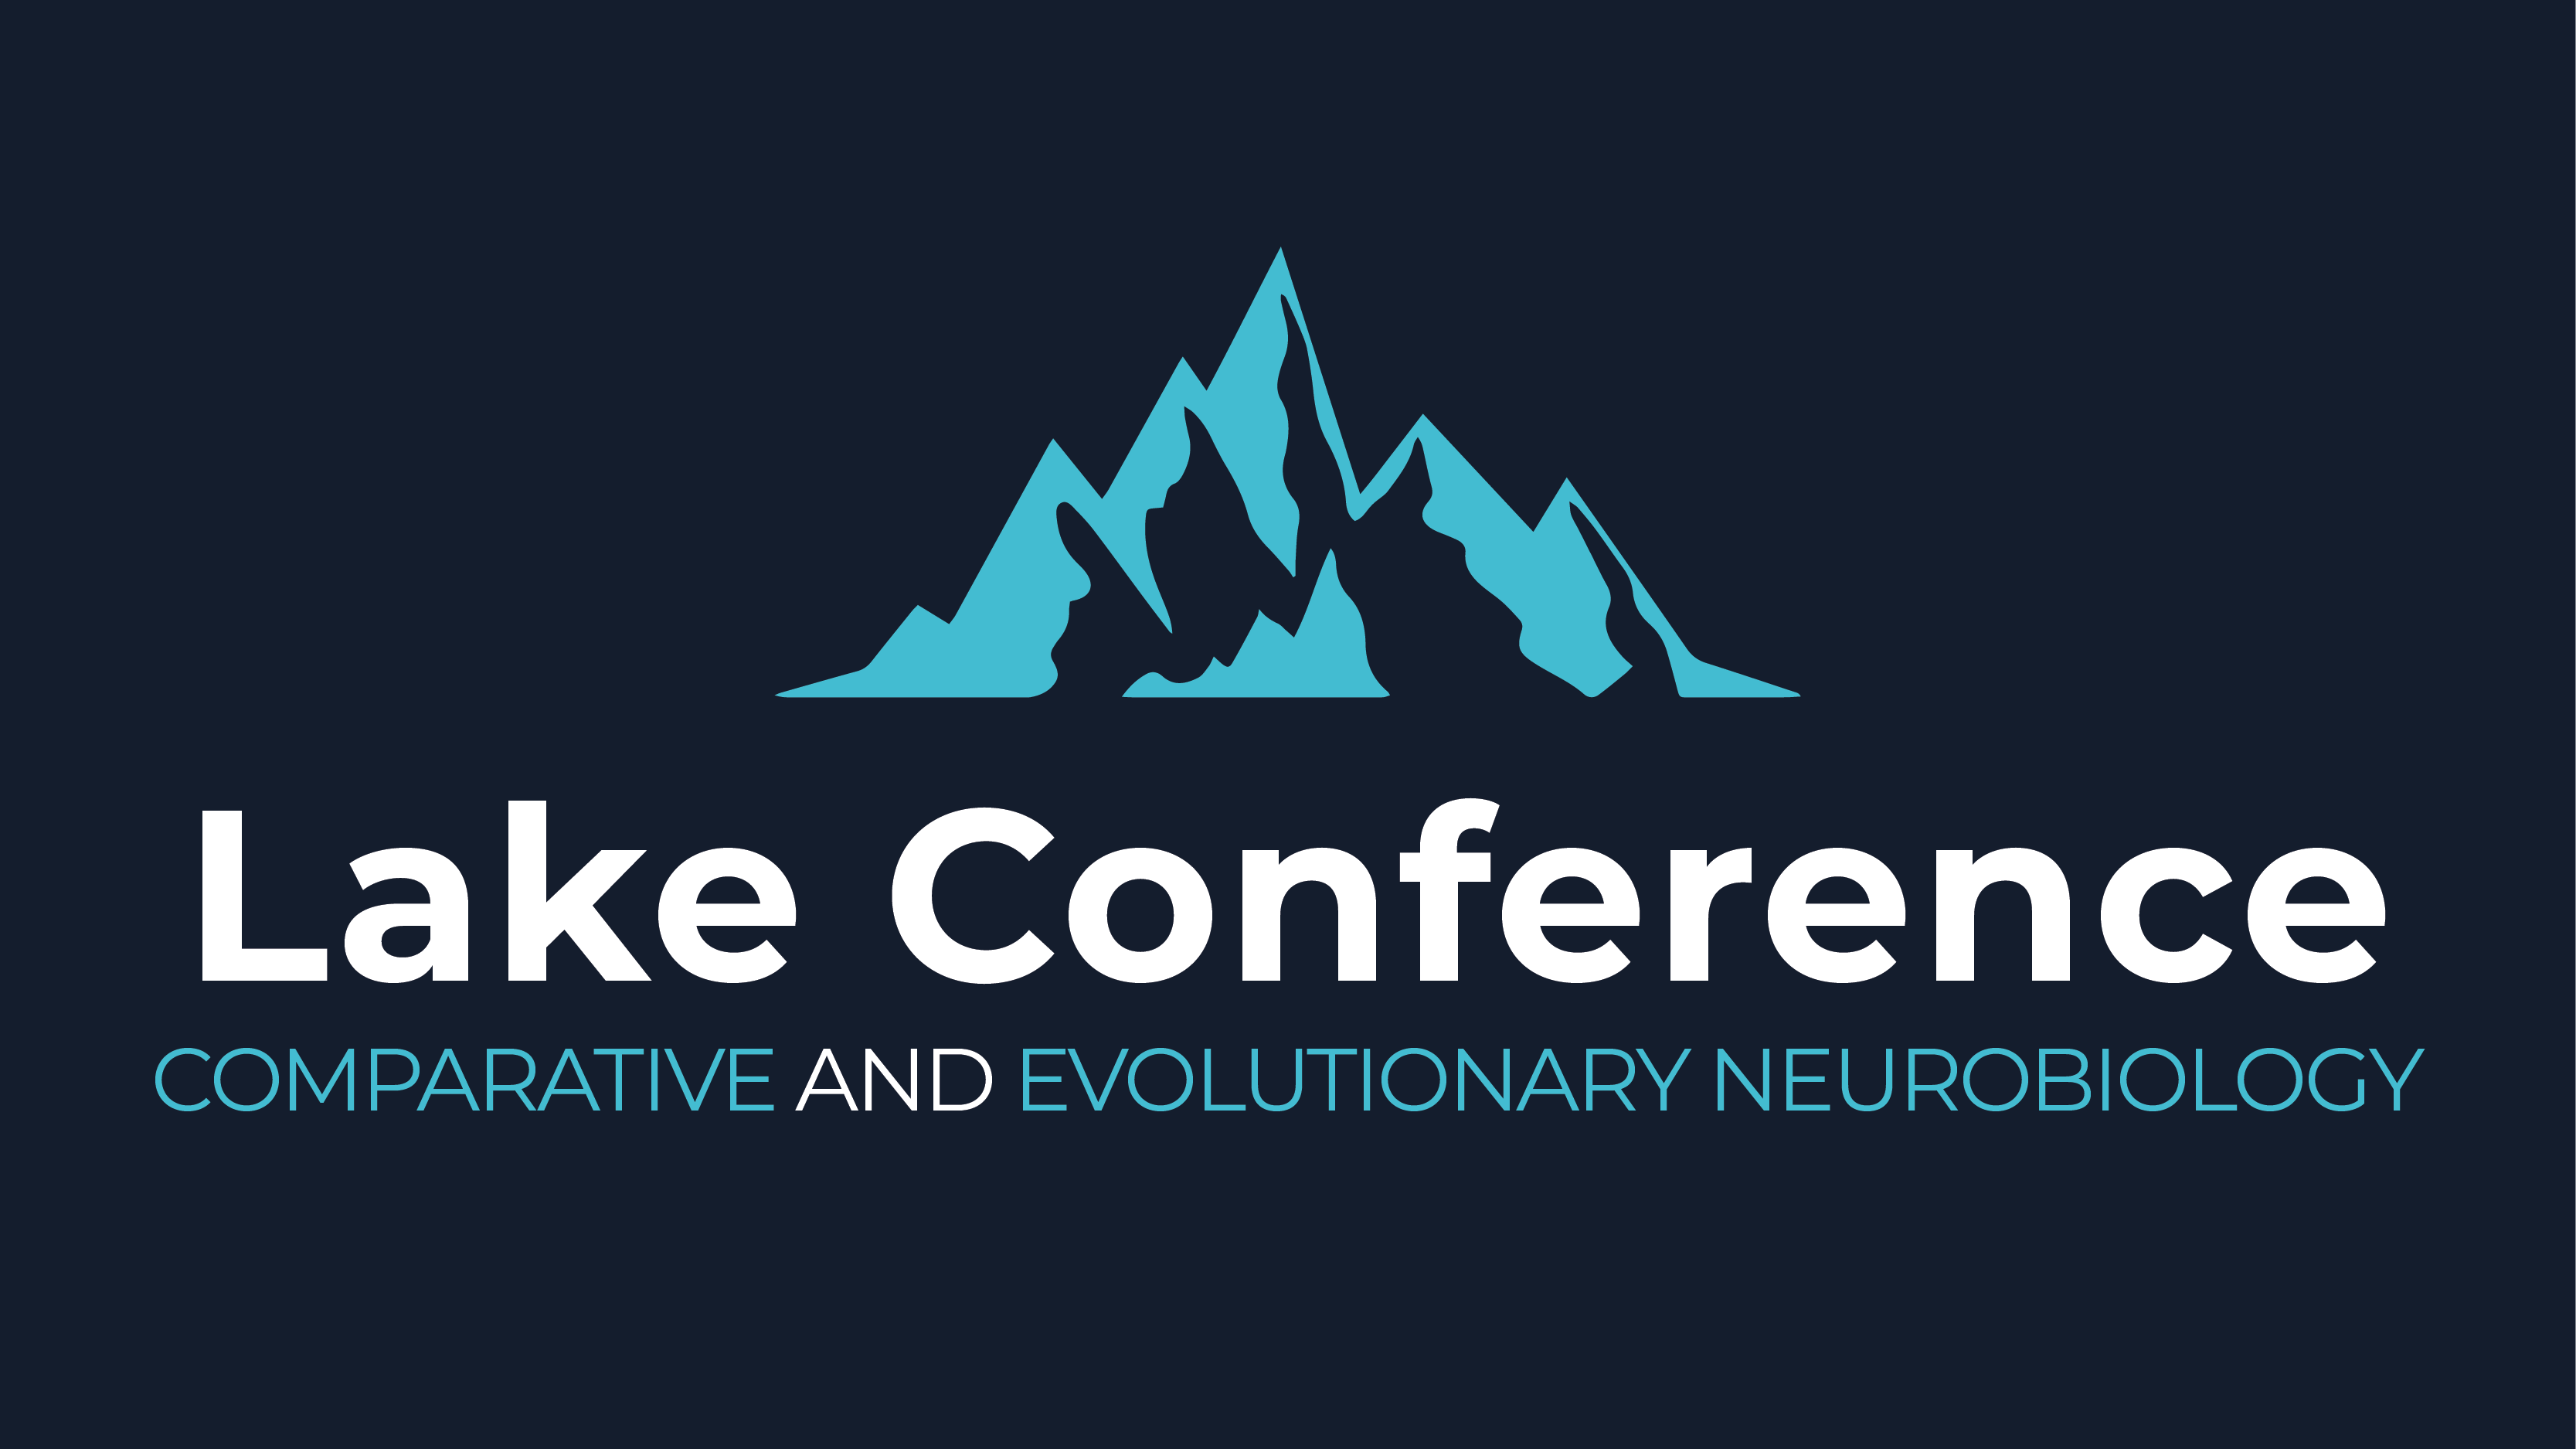 Lake Conference: Comparative and Evolutionary Neurobiology